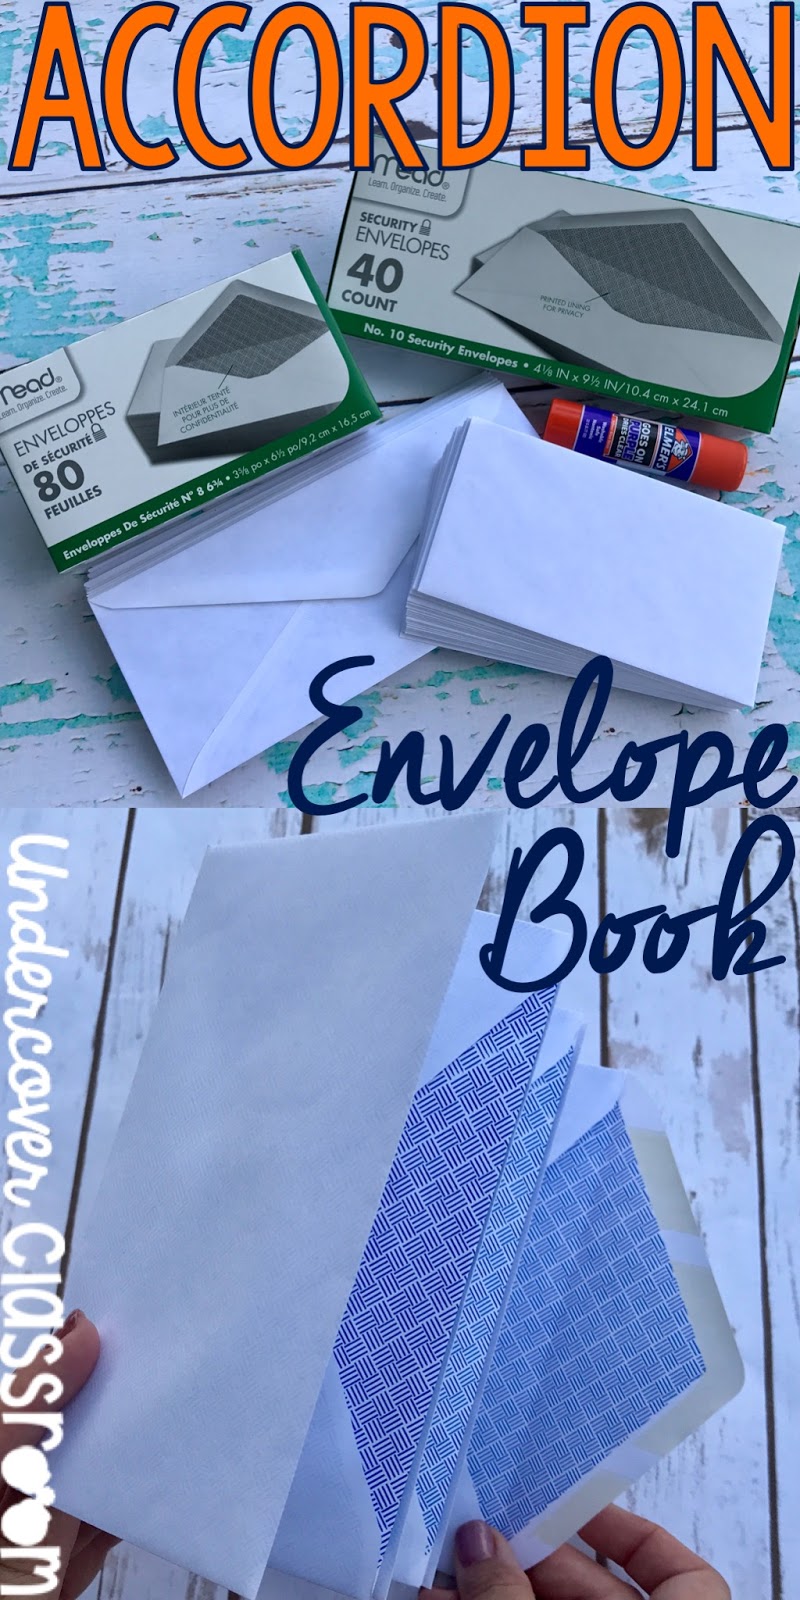 Learn how to make an accordion book out of envelopes that you can use in your classroom. Accordion envelope books are a handy tool you can use for many topics. Just fill up the pockets with content!